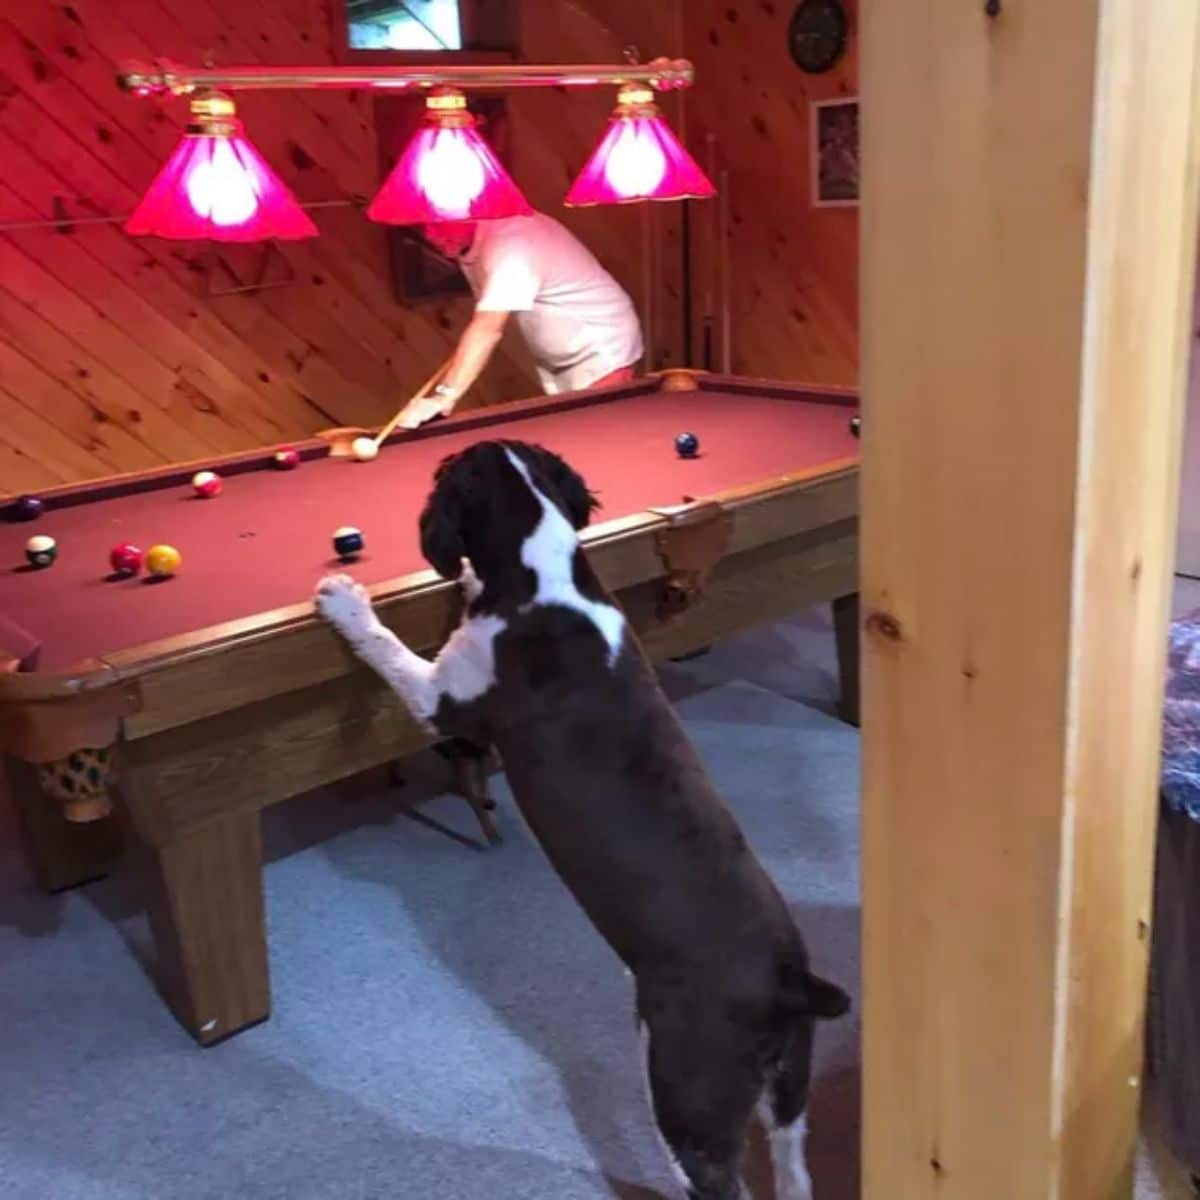 black and white dog standing on hind legs with the front paws on a pool table while a man is playing on the other side